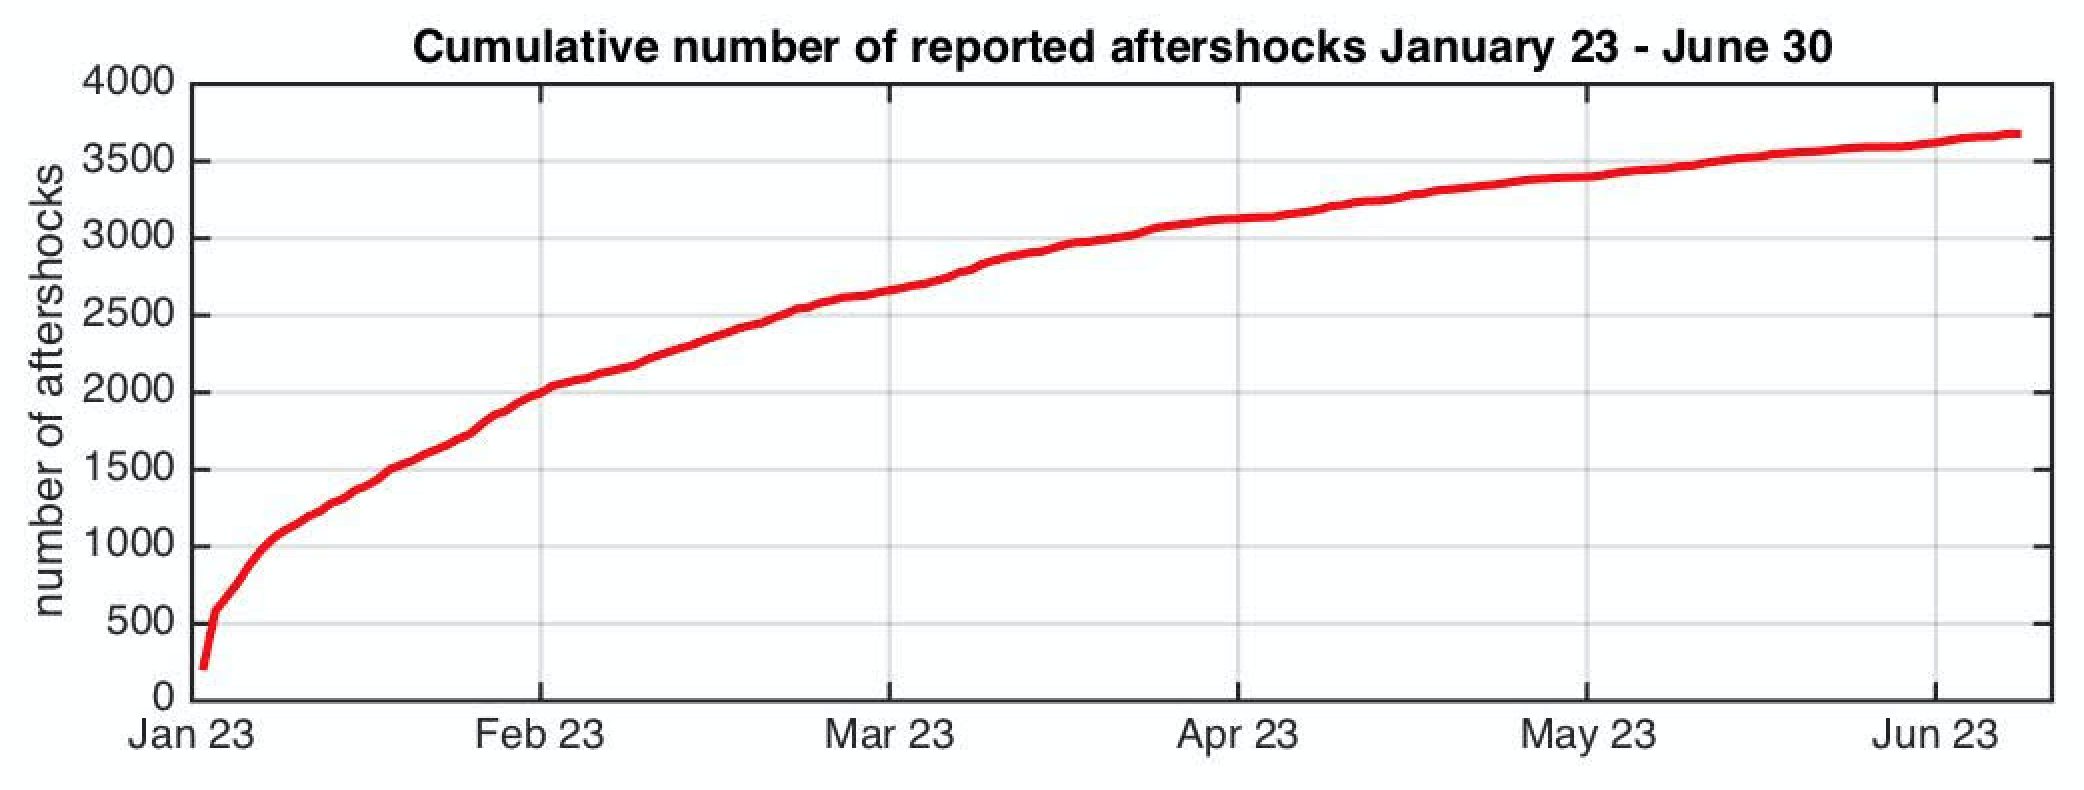 The rate of aftershocks has tapered steadily since January